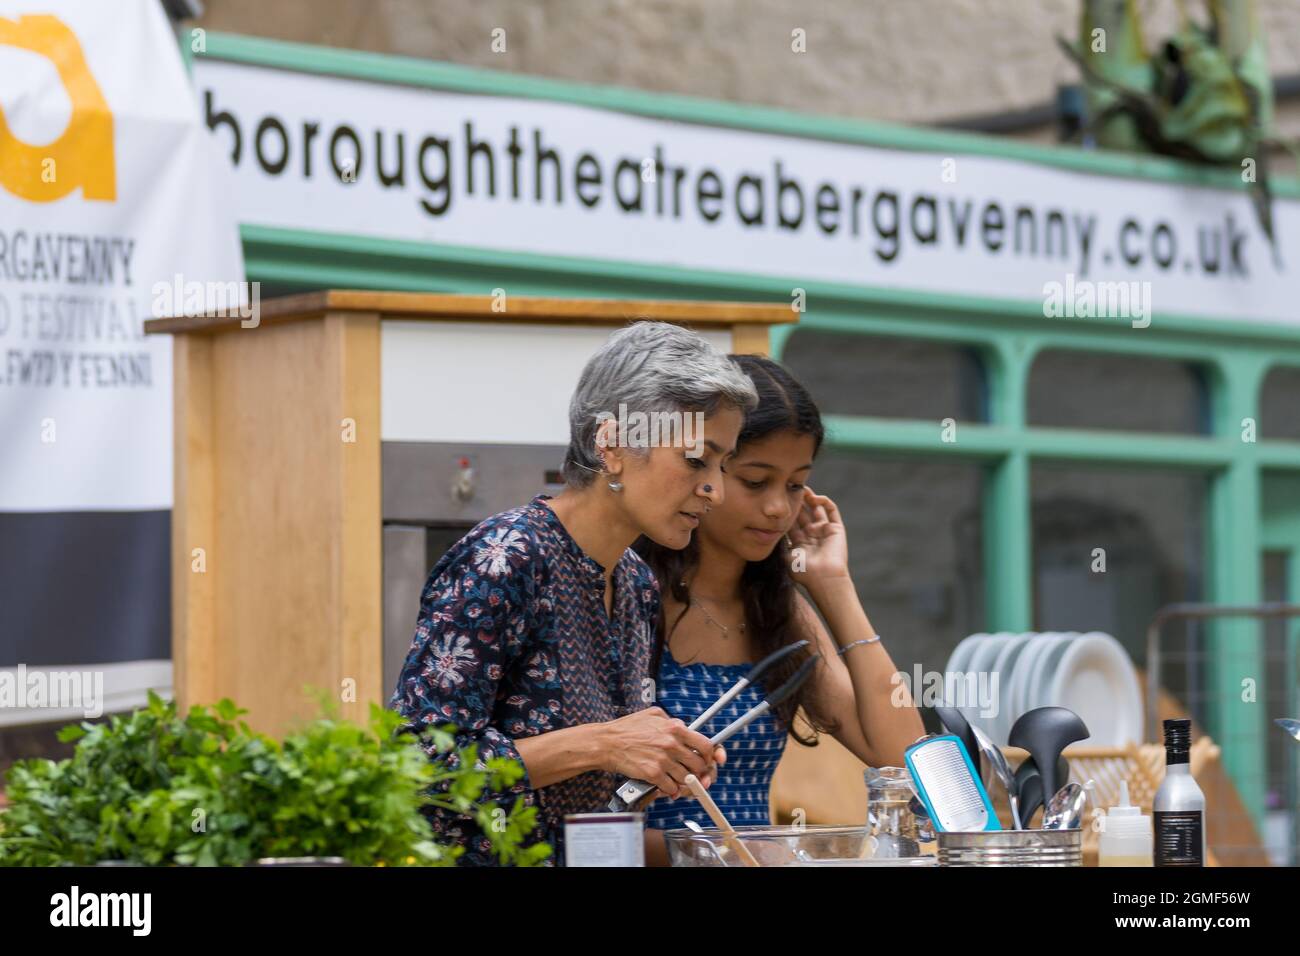 Chetna Makan, chef and author appears at a cook-in at Abergavenny Food Festival 2021. Stock Photo